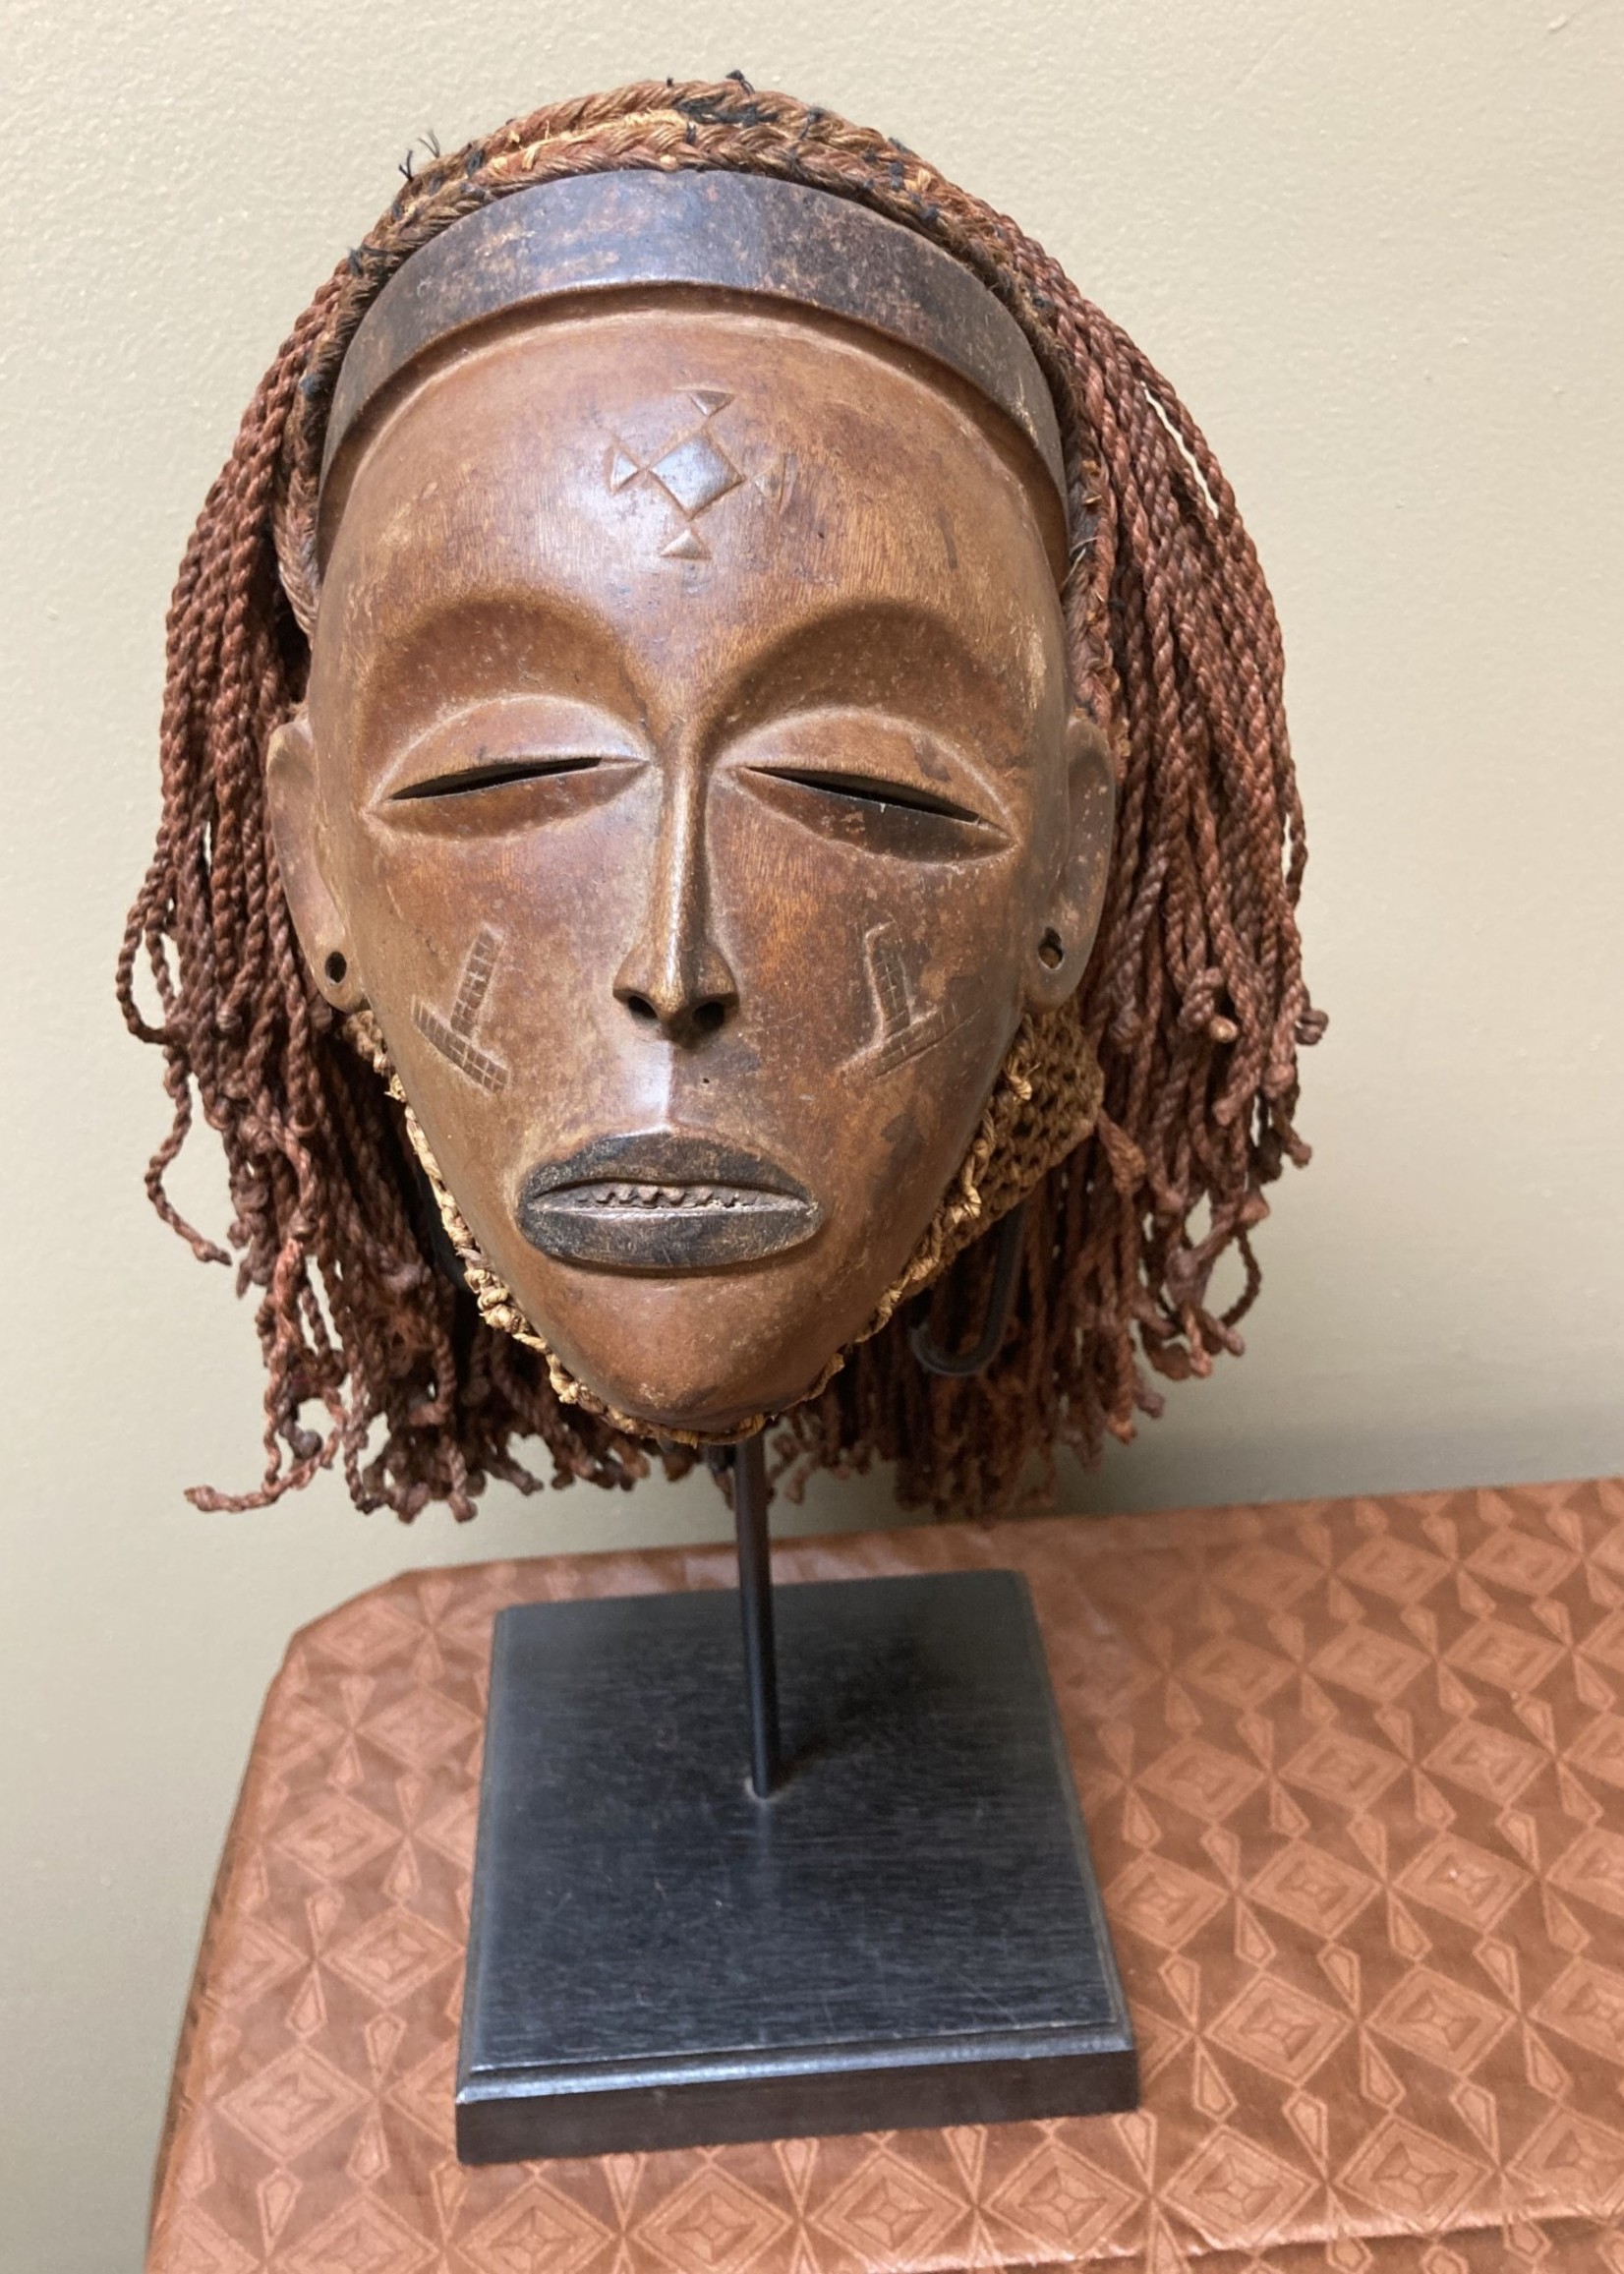 Chokwe “Mwana Pwo” mask of the Chokwe (Tchokwe or Bajokwer) of Angola. Pwo is their word for woman. It represents a young woman who has been fully trained and is ready for marriage. Stand is included. Total height is 17 ⅛”